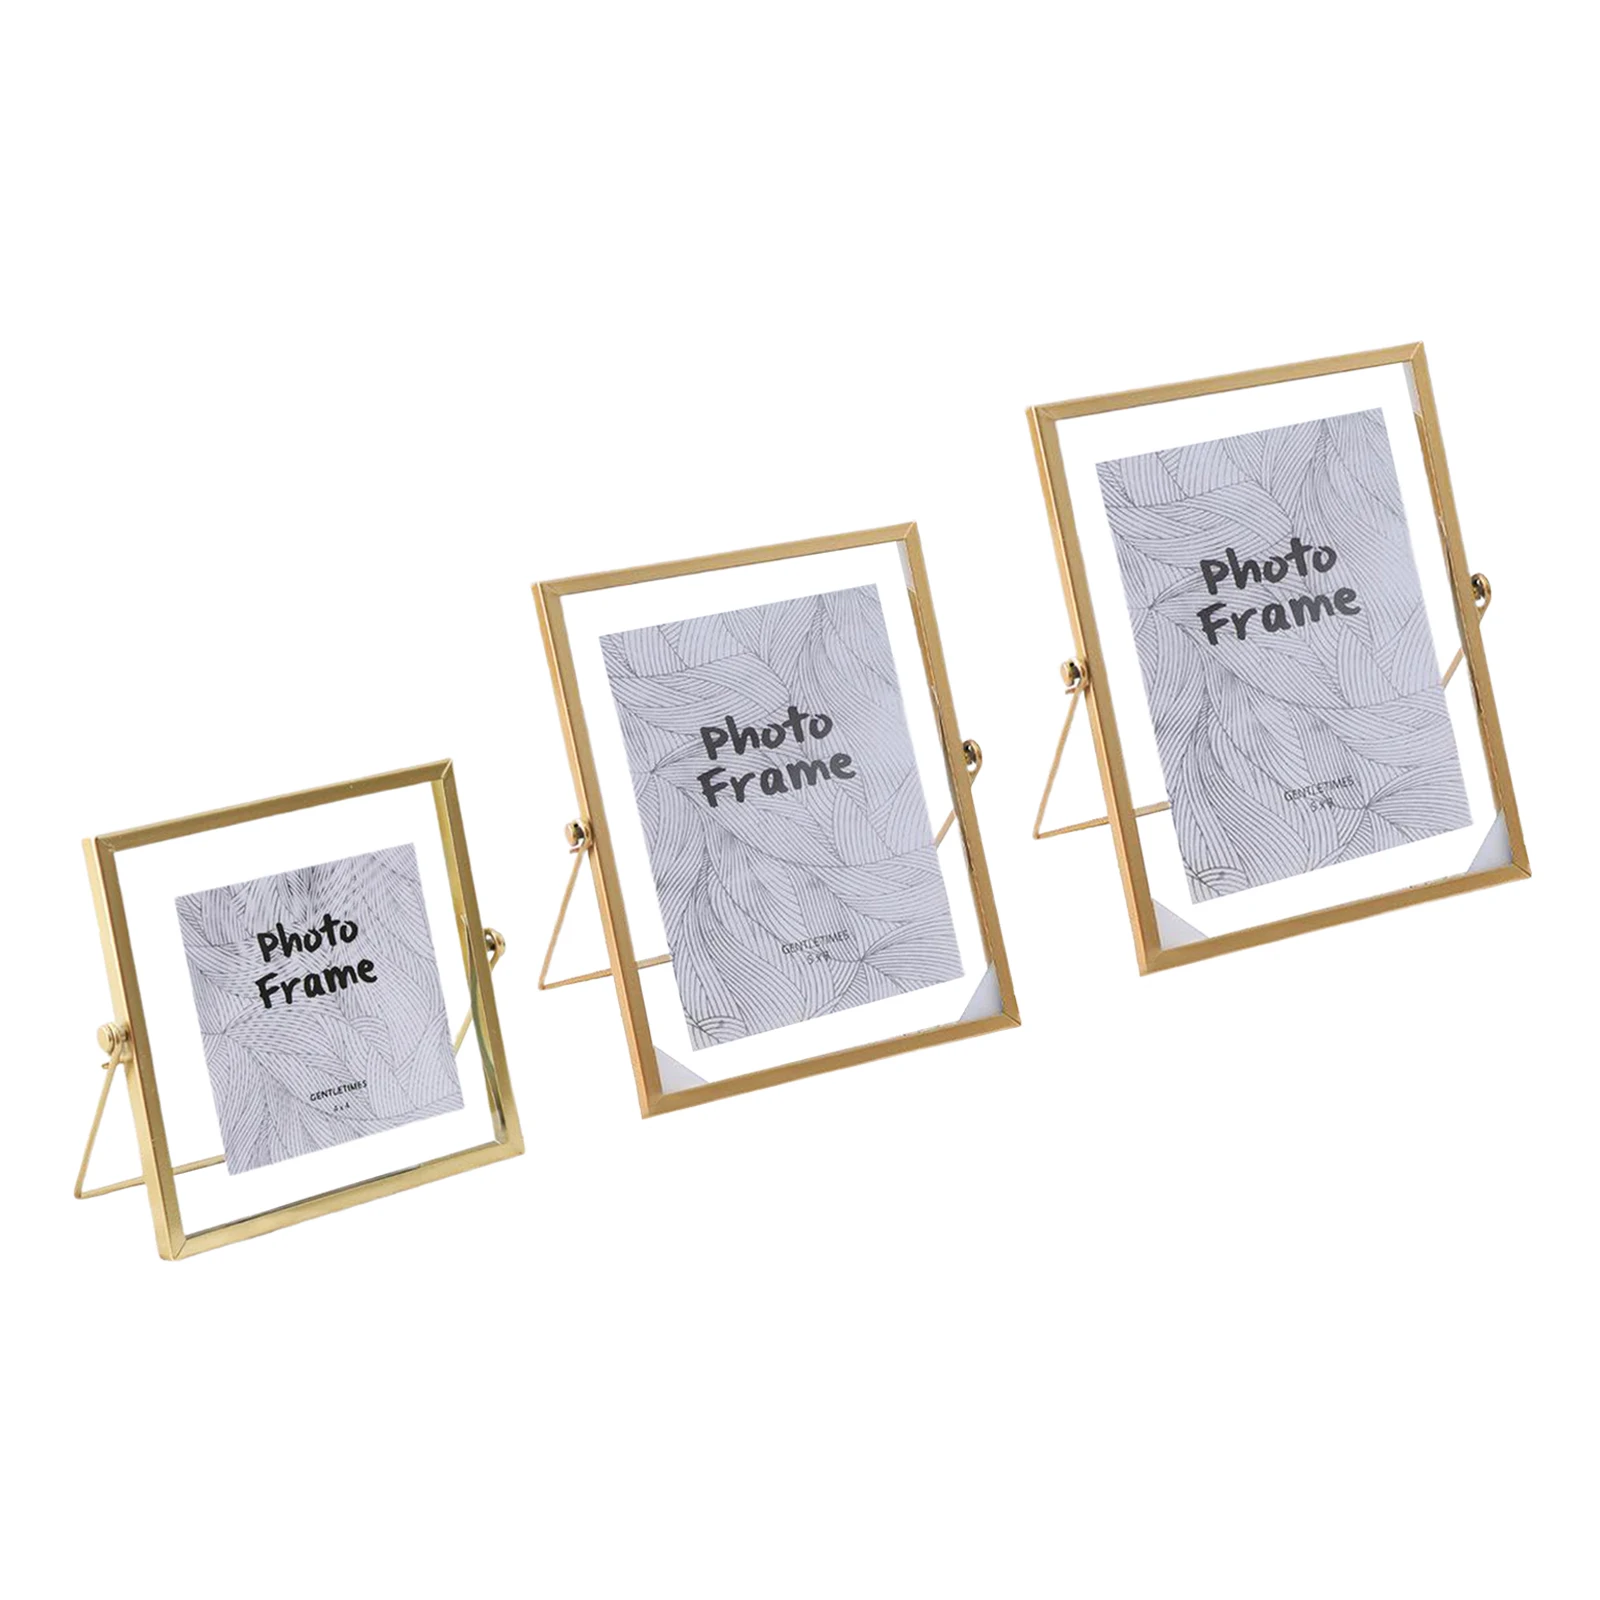 Modern Gold Edge Floating Glass Freestanding Photo Picture Frame for Home